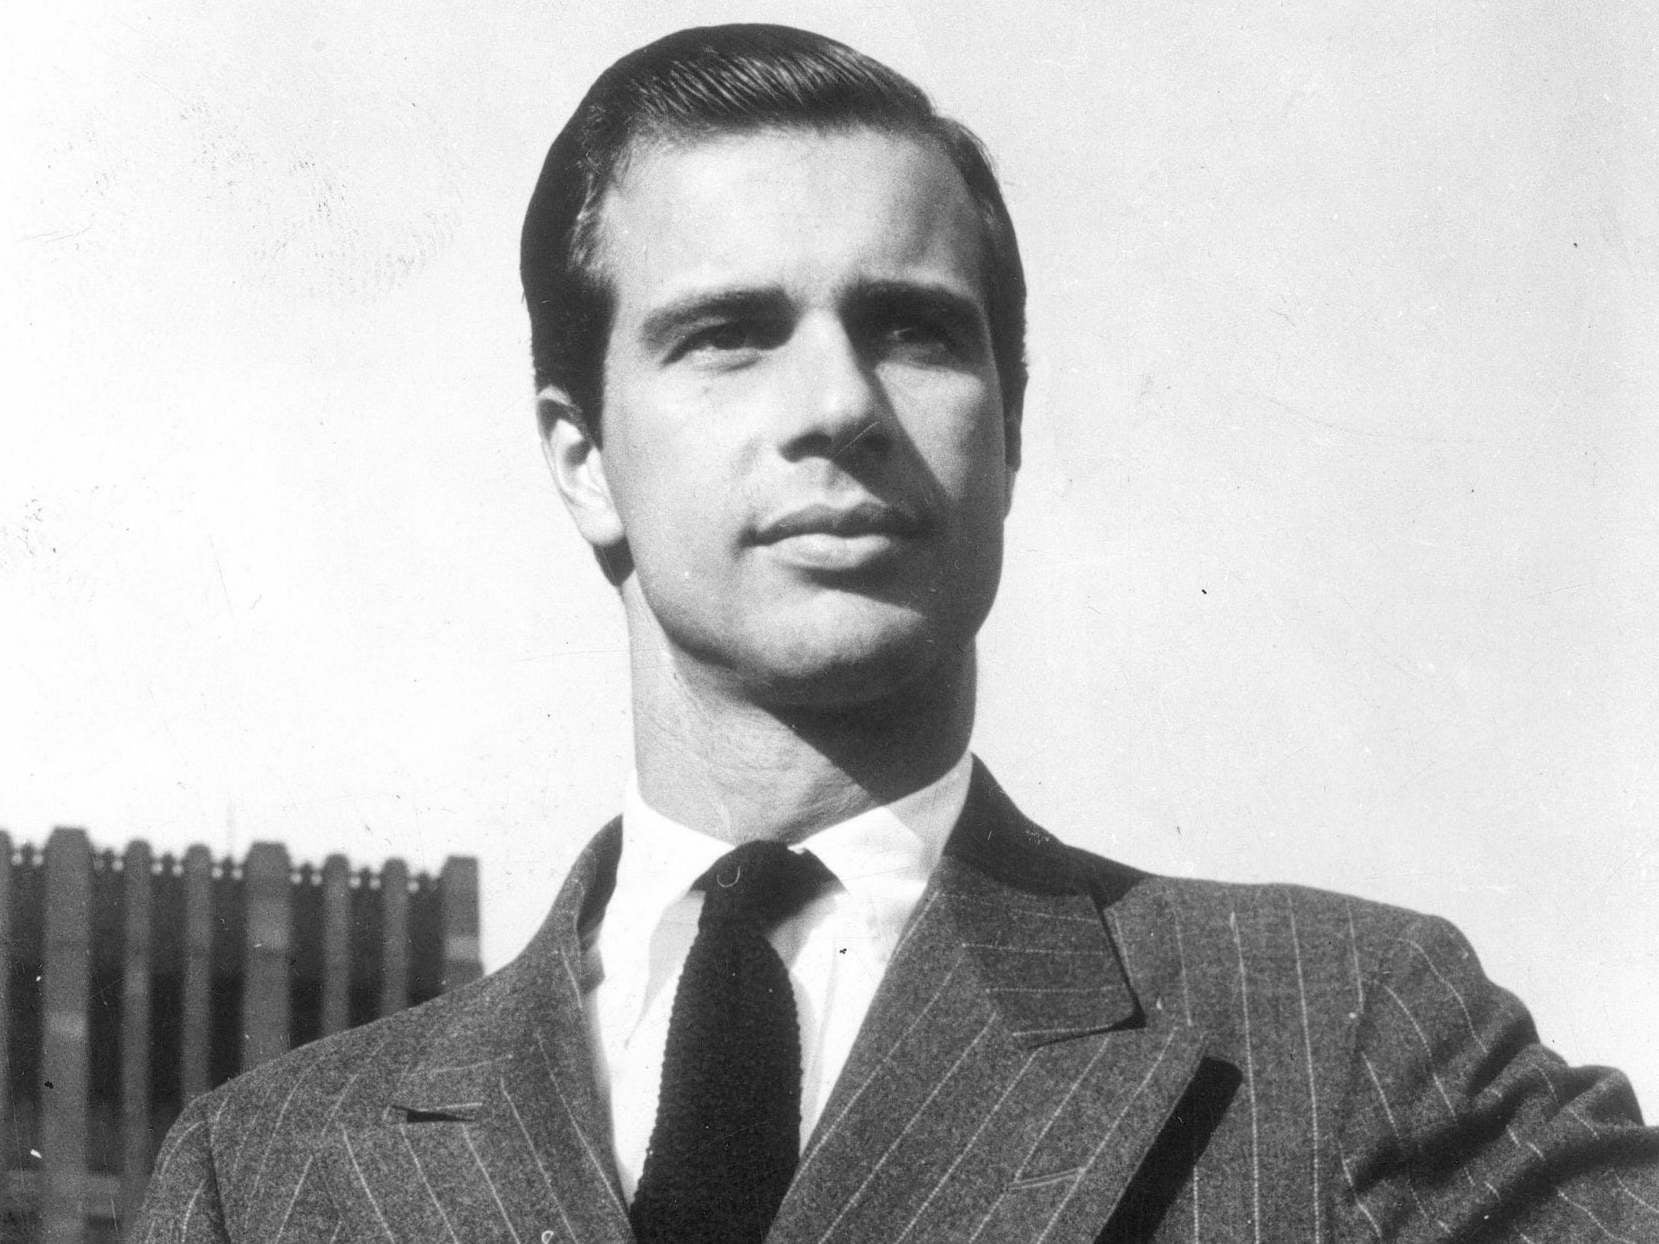 John Hersey used a Trojan horse strategy to get into Hiroshima